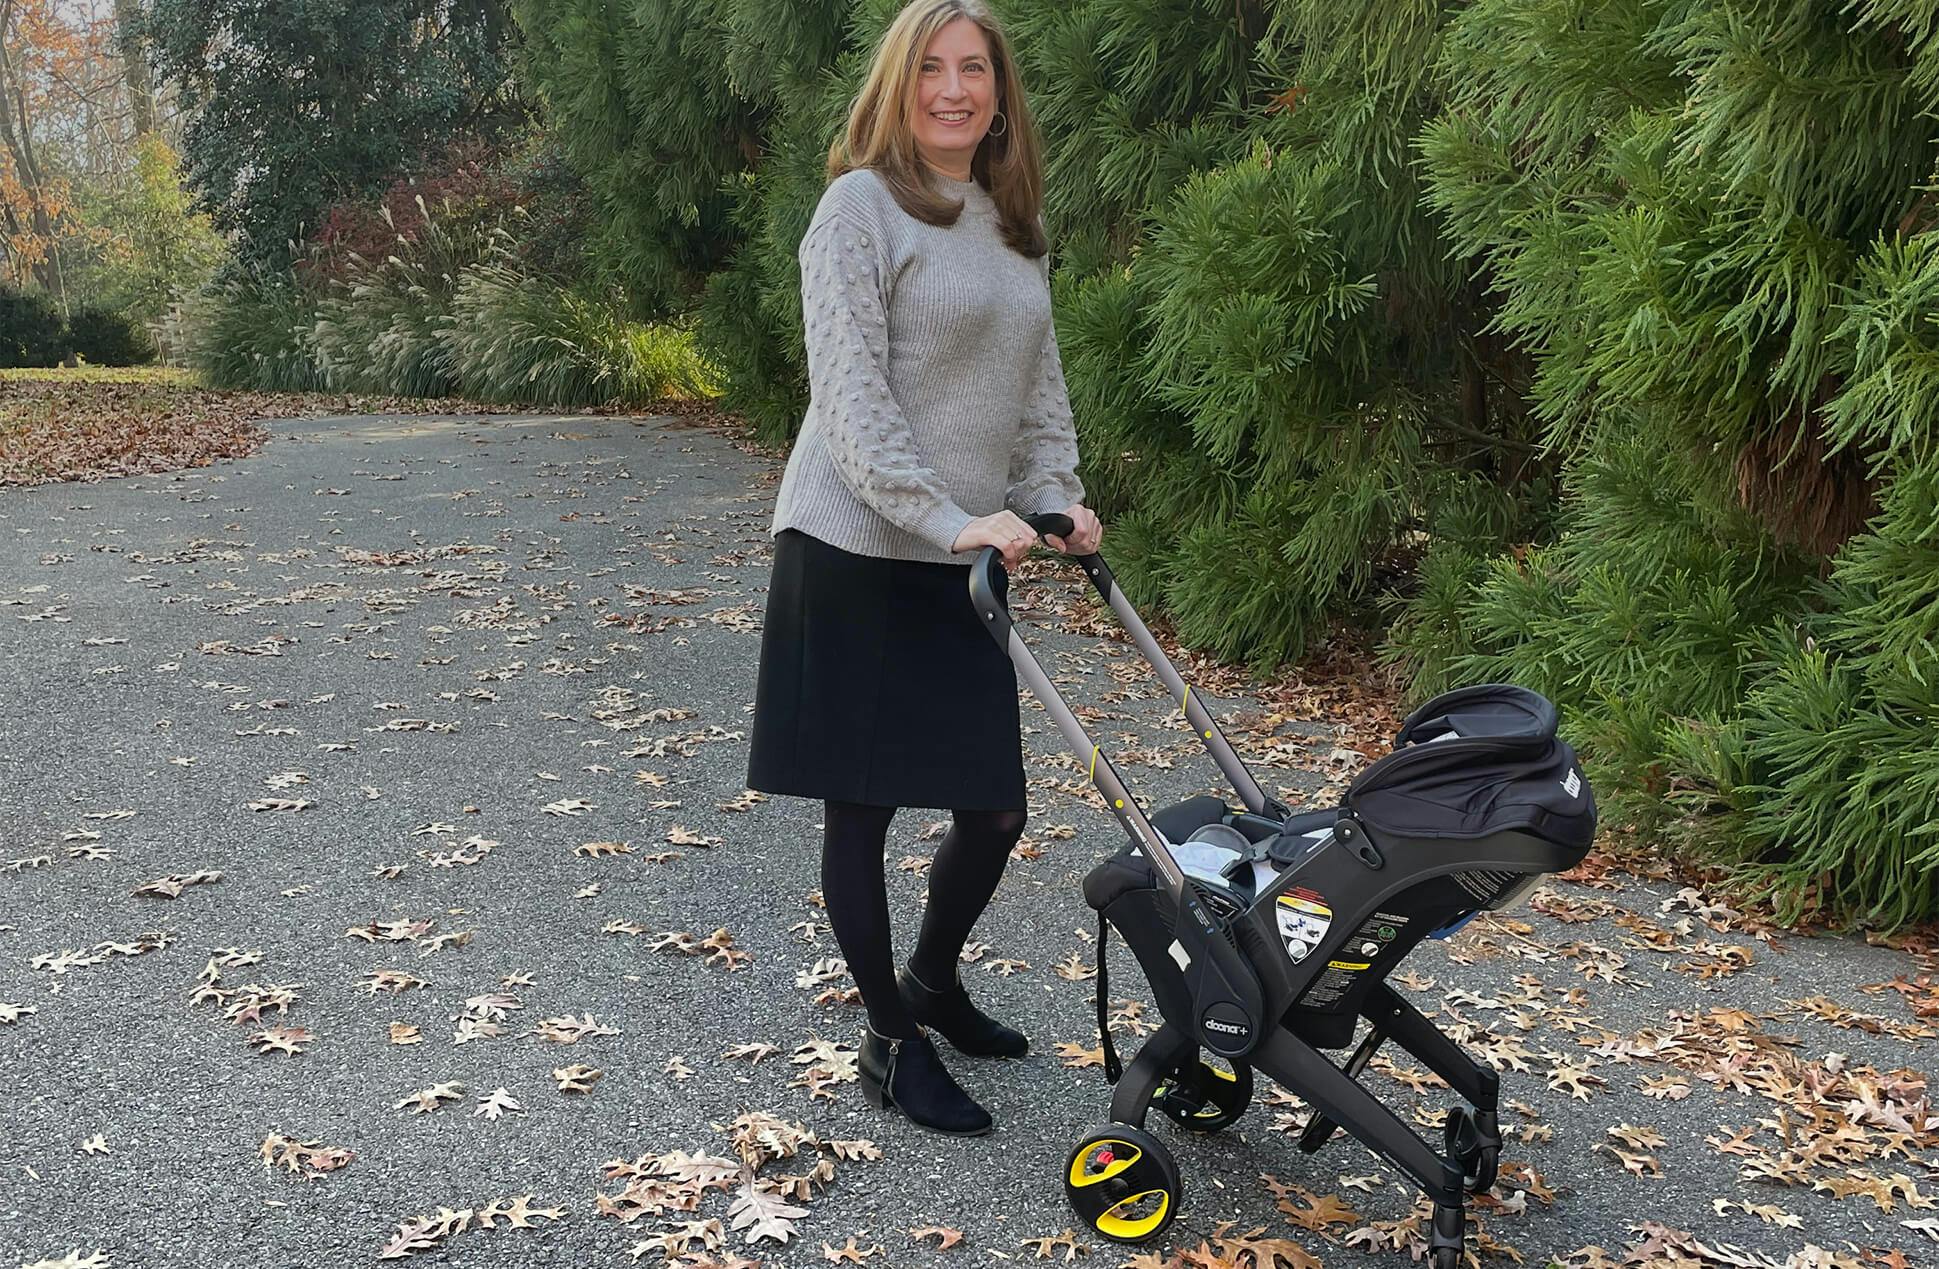 Blog - Insight on Parenting and Pregnancy with expert Sharon Mazel